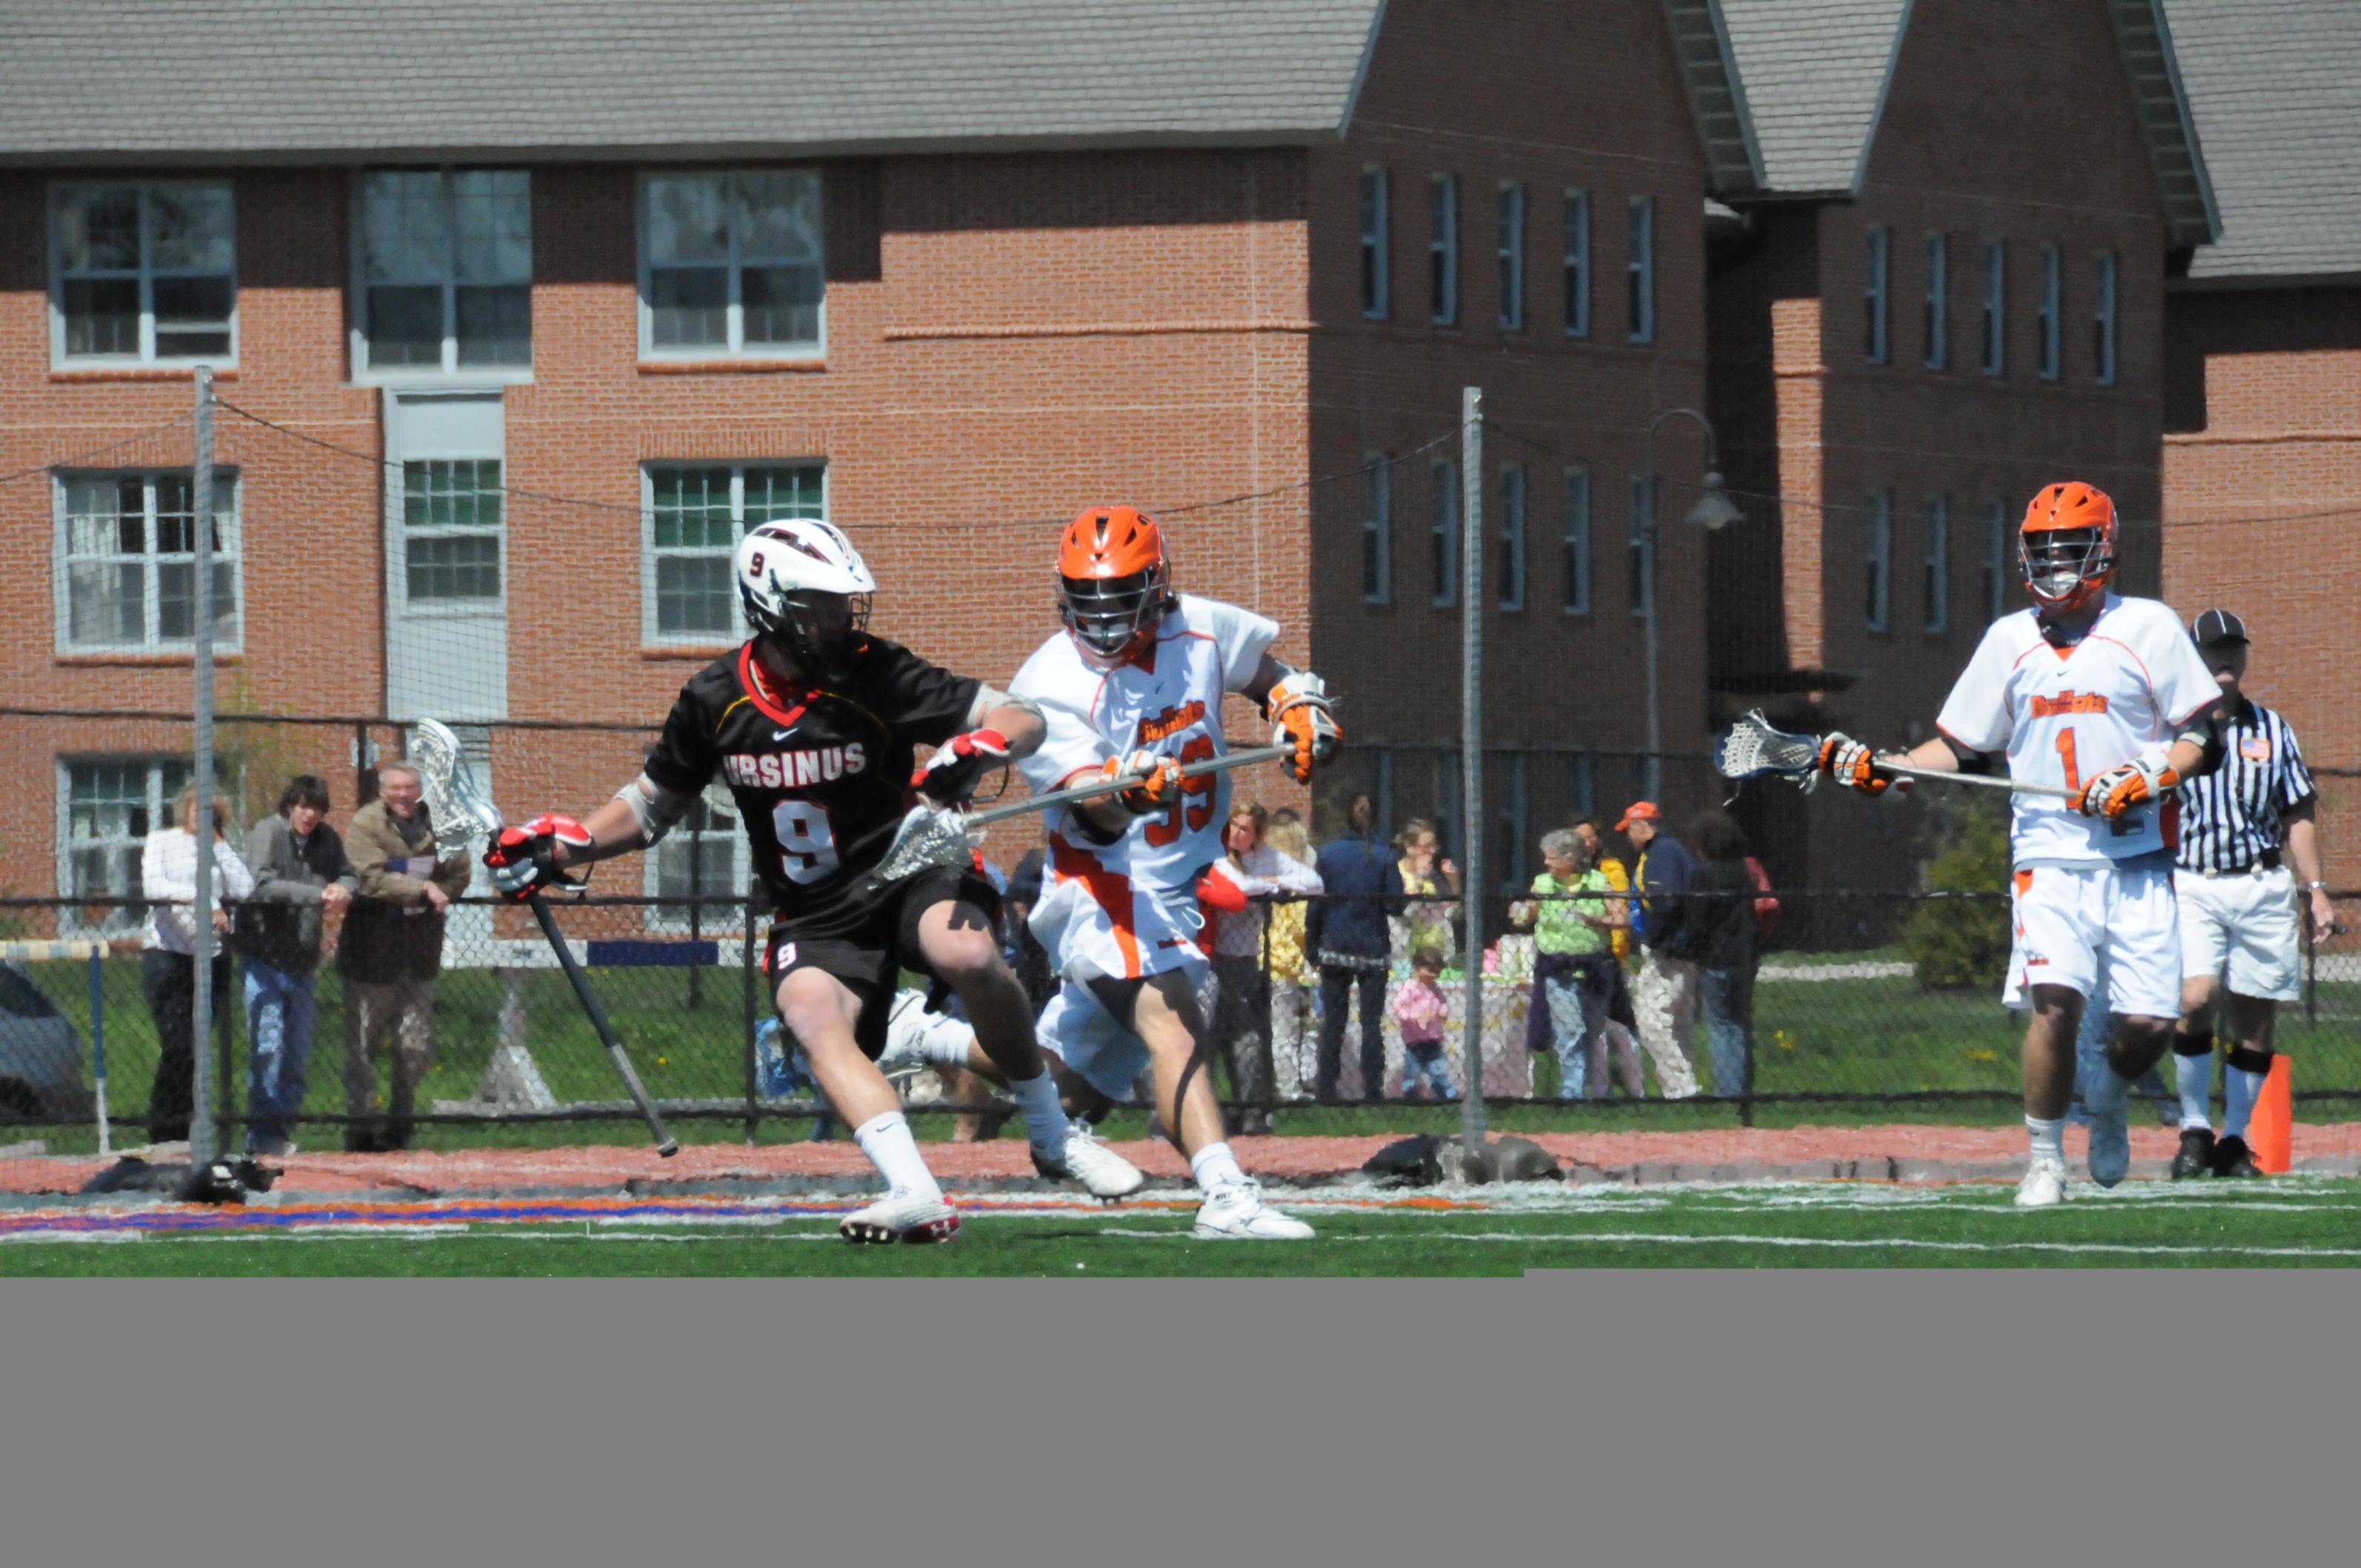 Men's Lacrosse downed by Dickinson, 13-8